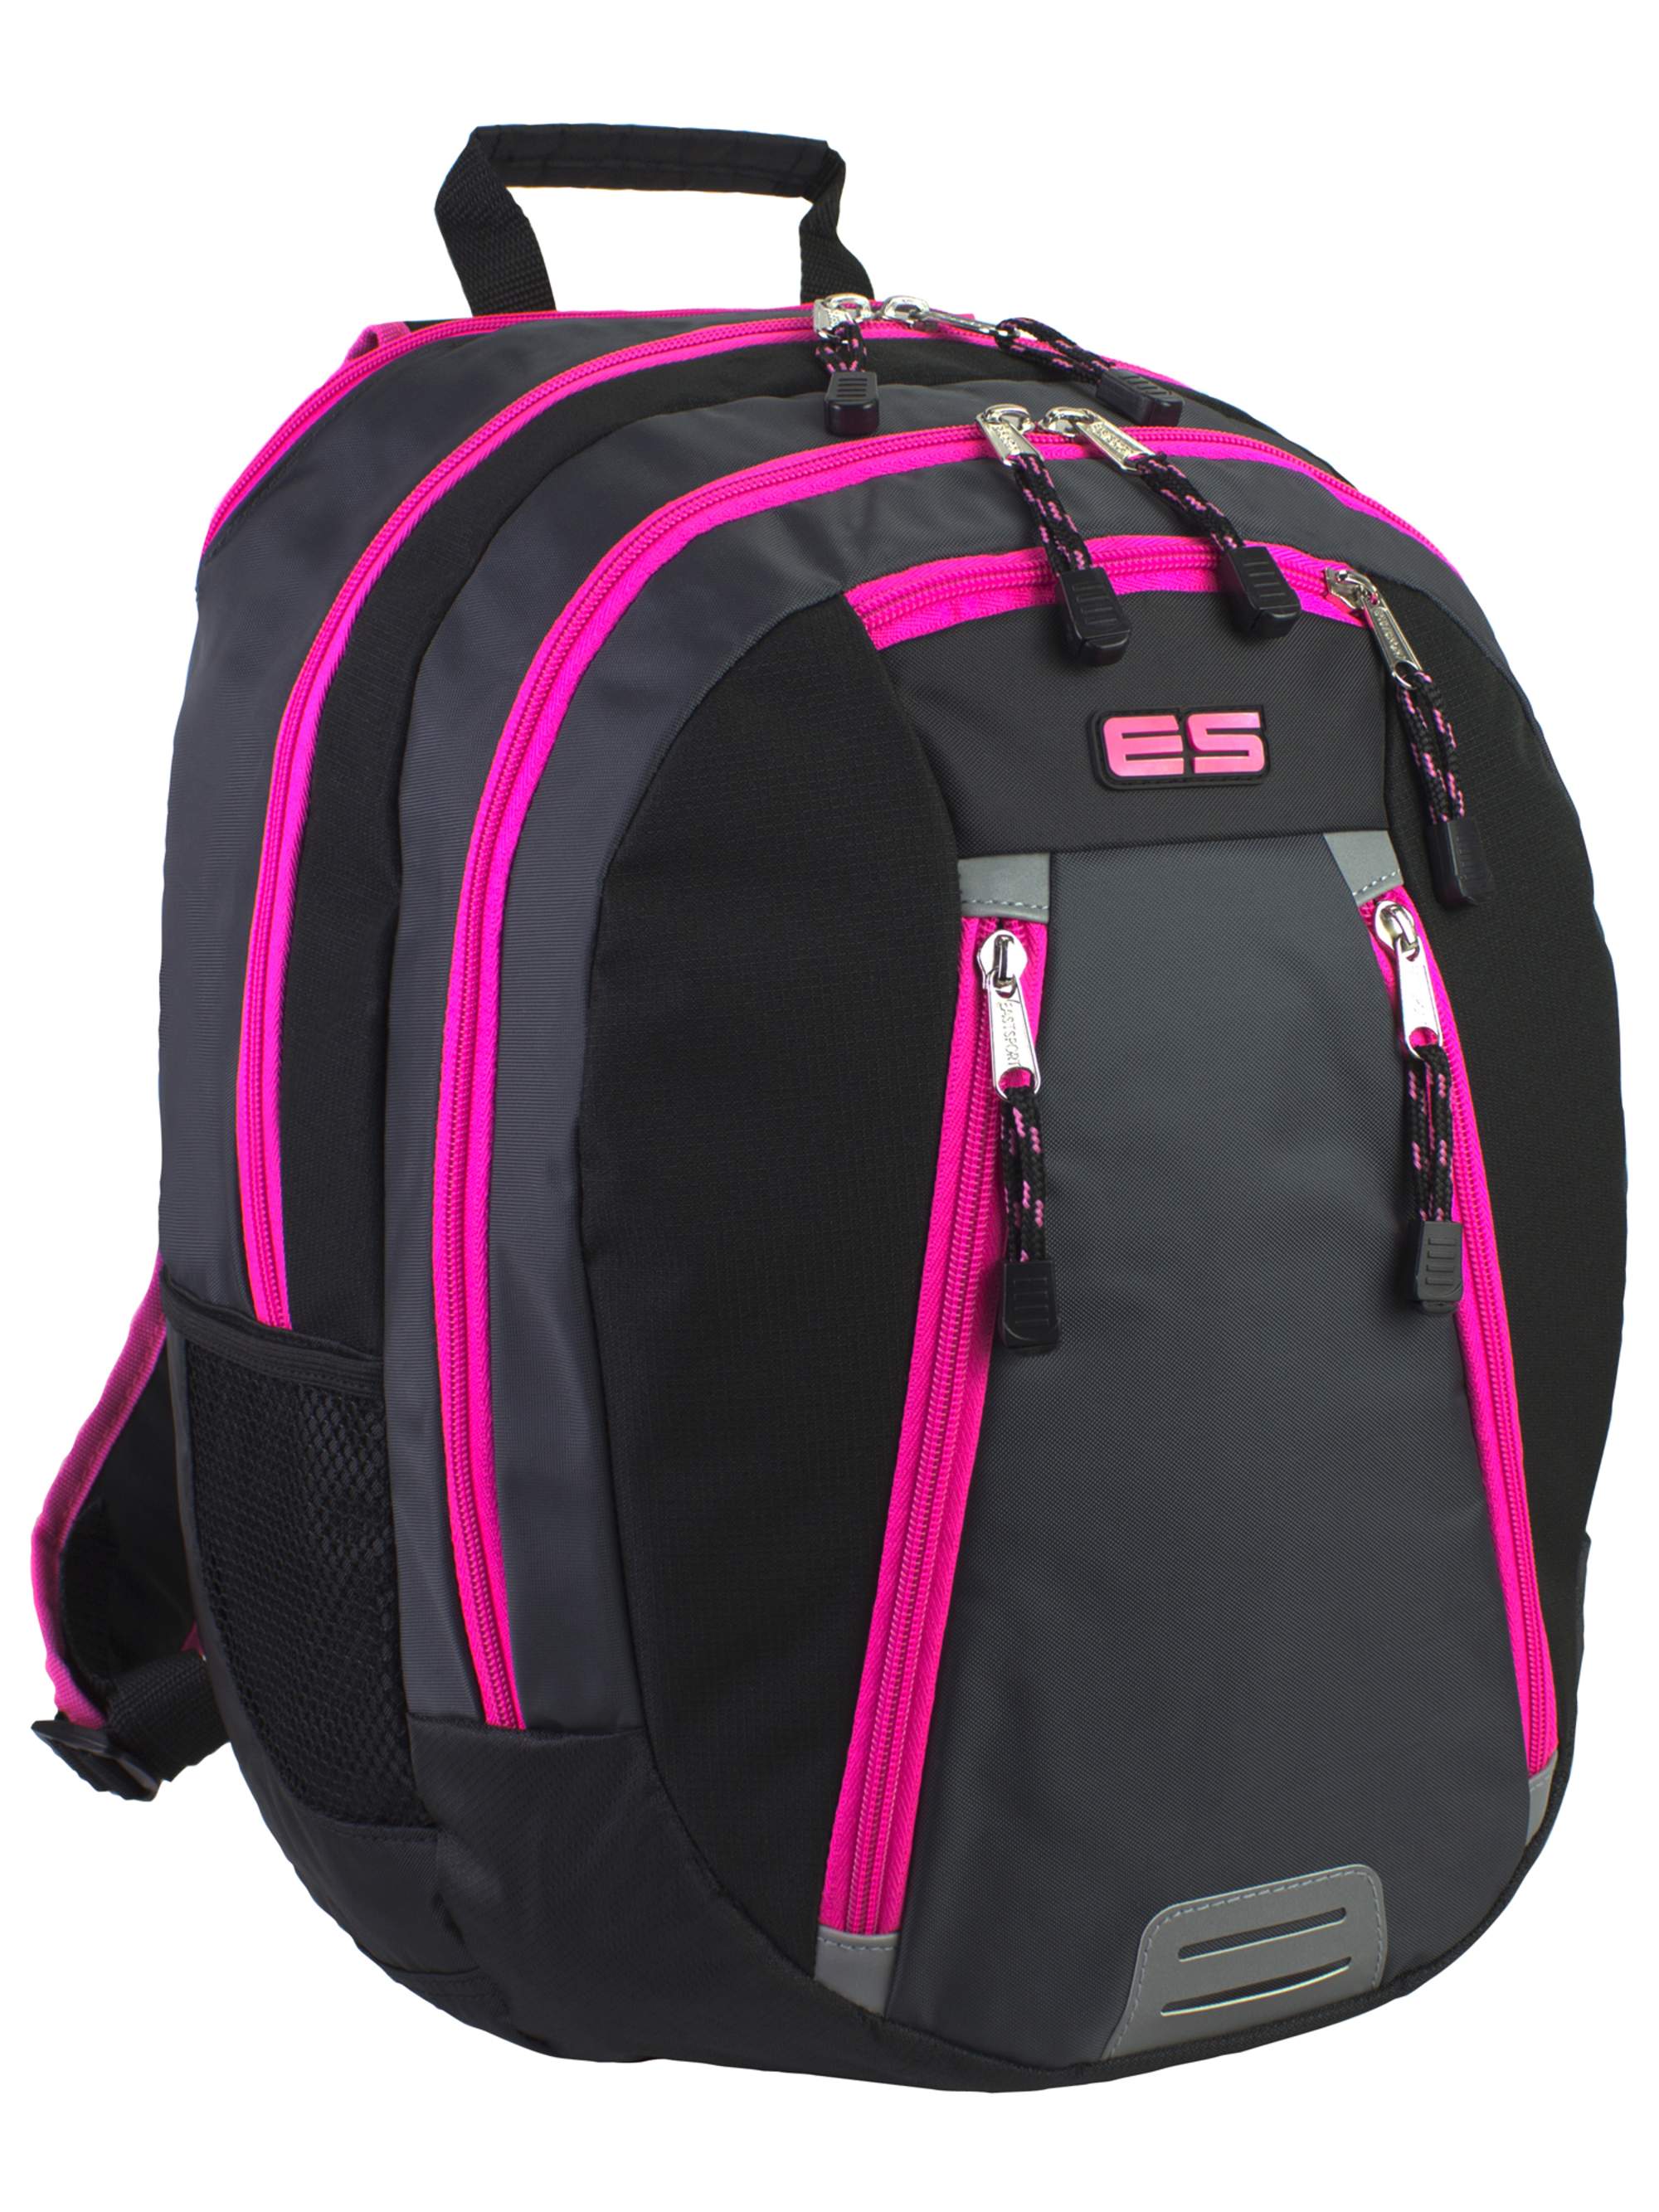 Eastsport Absolute Sport Backpack with 5 Compartments - image 1 of 4